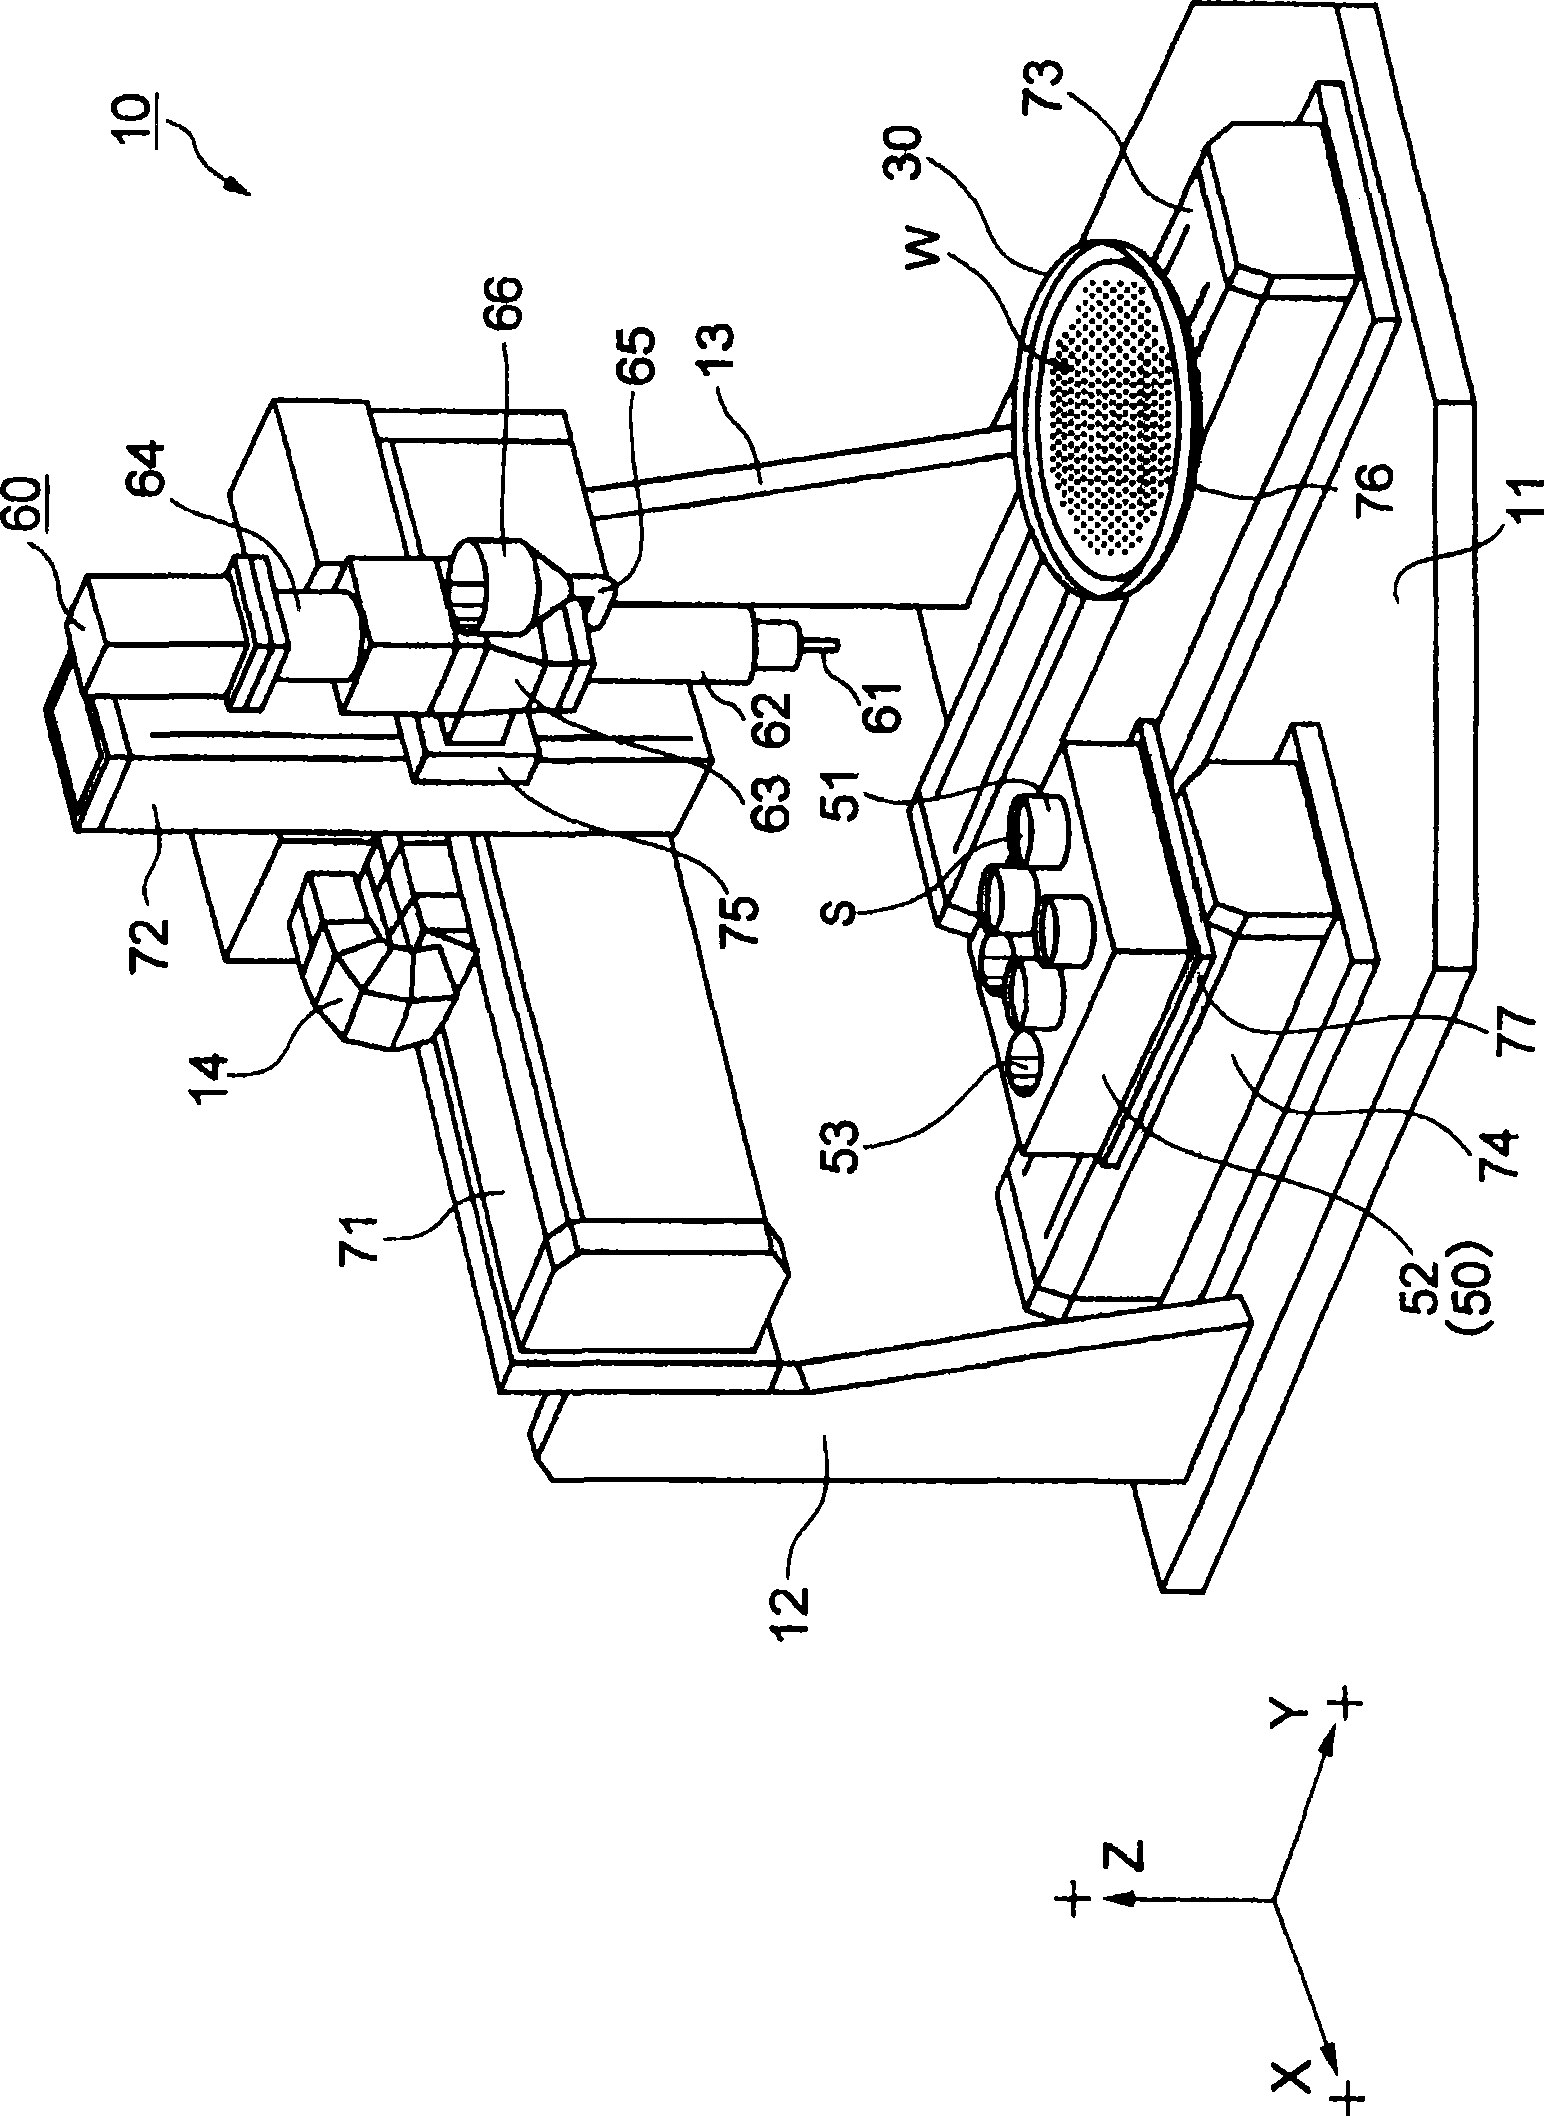 Material supplying device and method